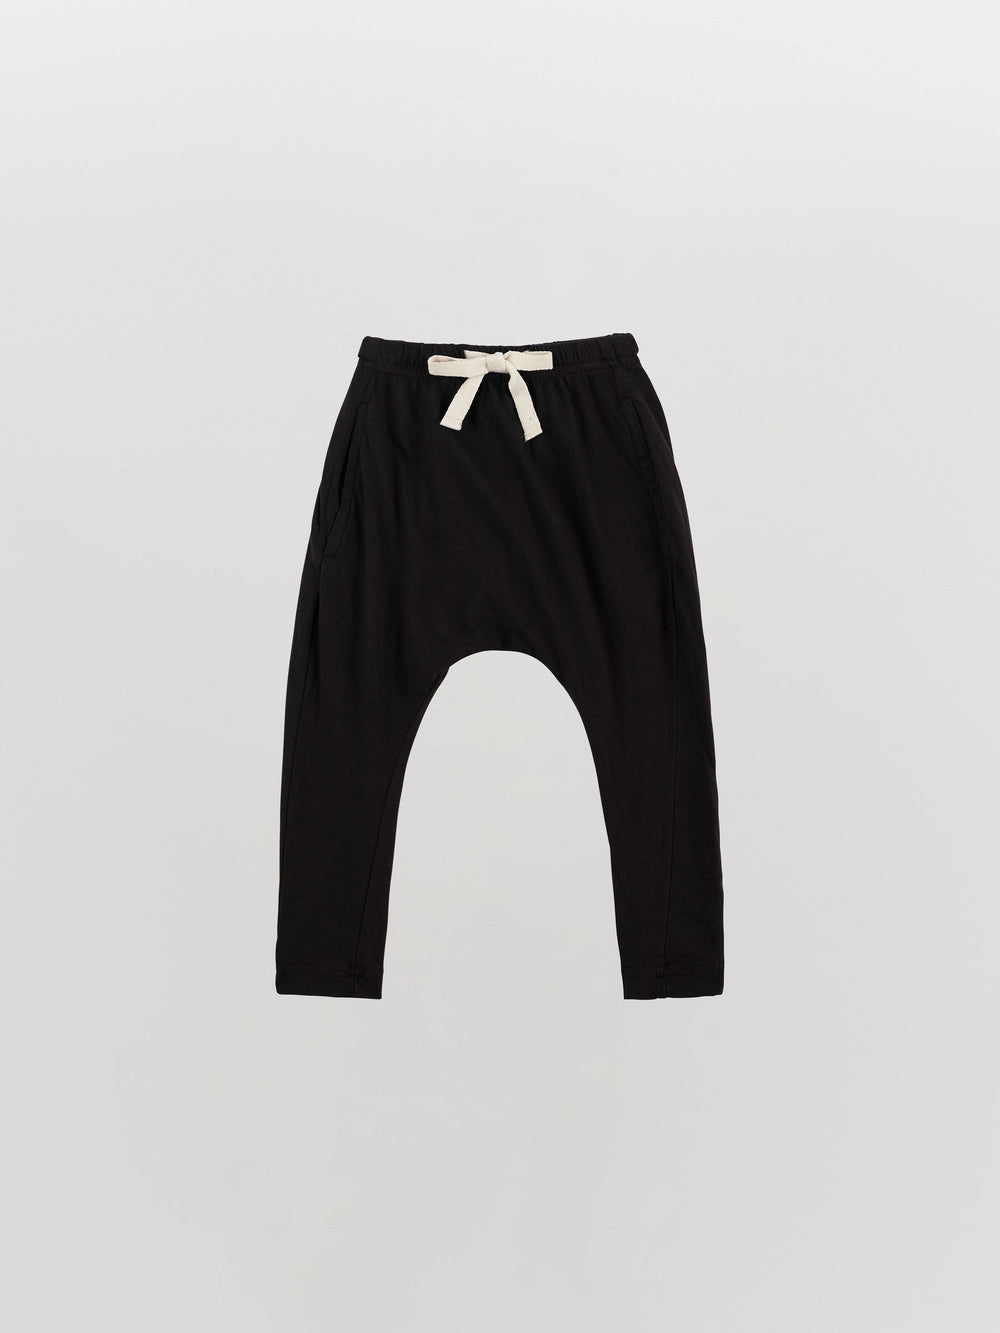 mini slouch jersey pant ll